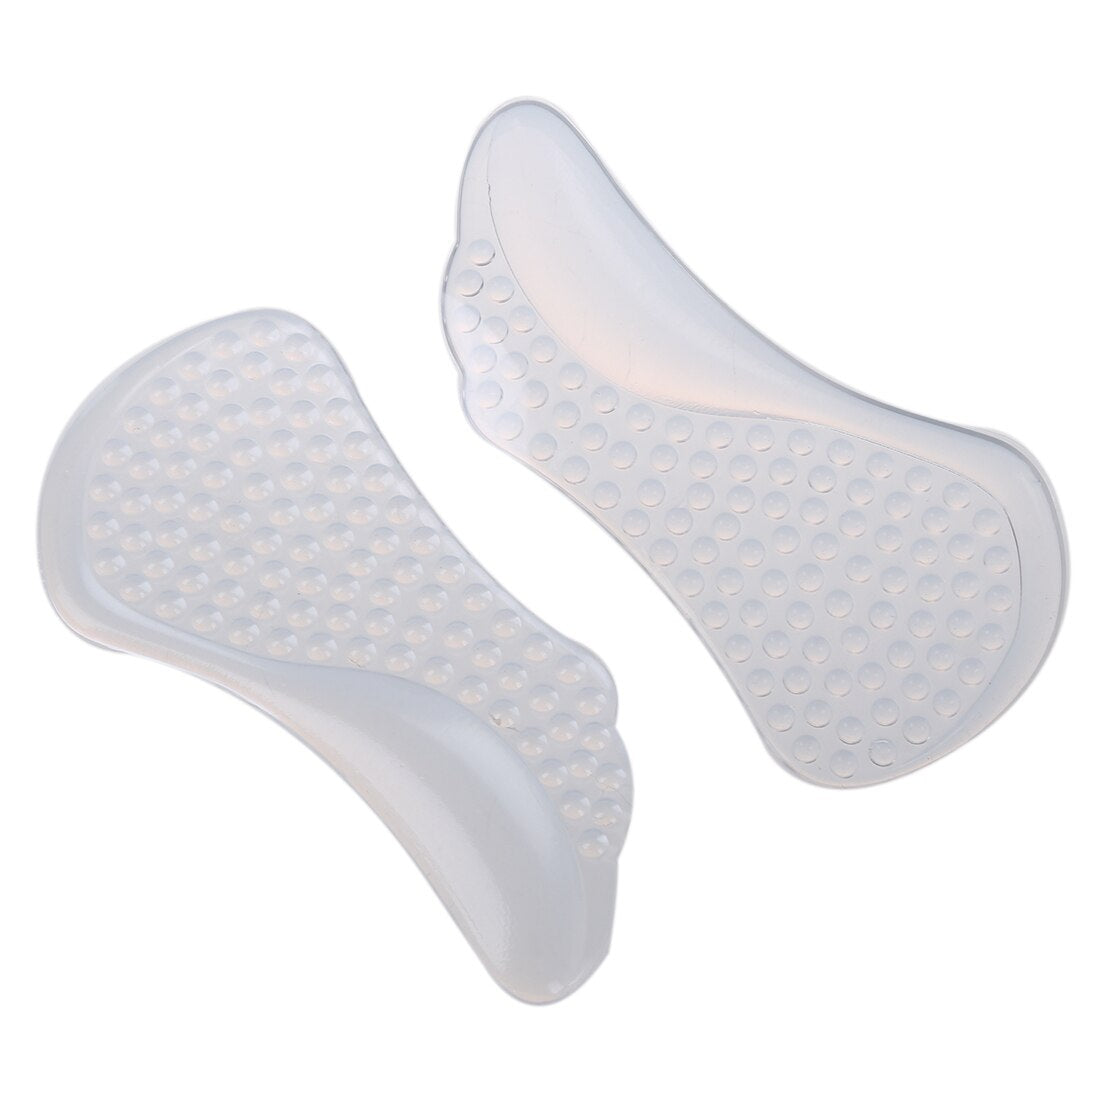 Hot-Non-Slip Arch Support Cushions + Adhesive Gel Shoes Insoles for Flat Feet/Fallen Arches - ebowsos